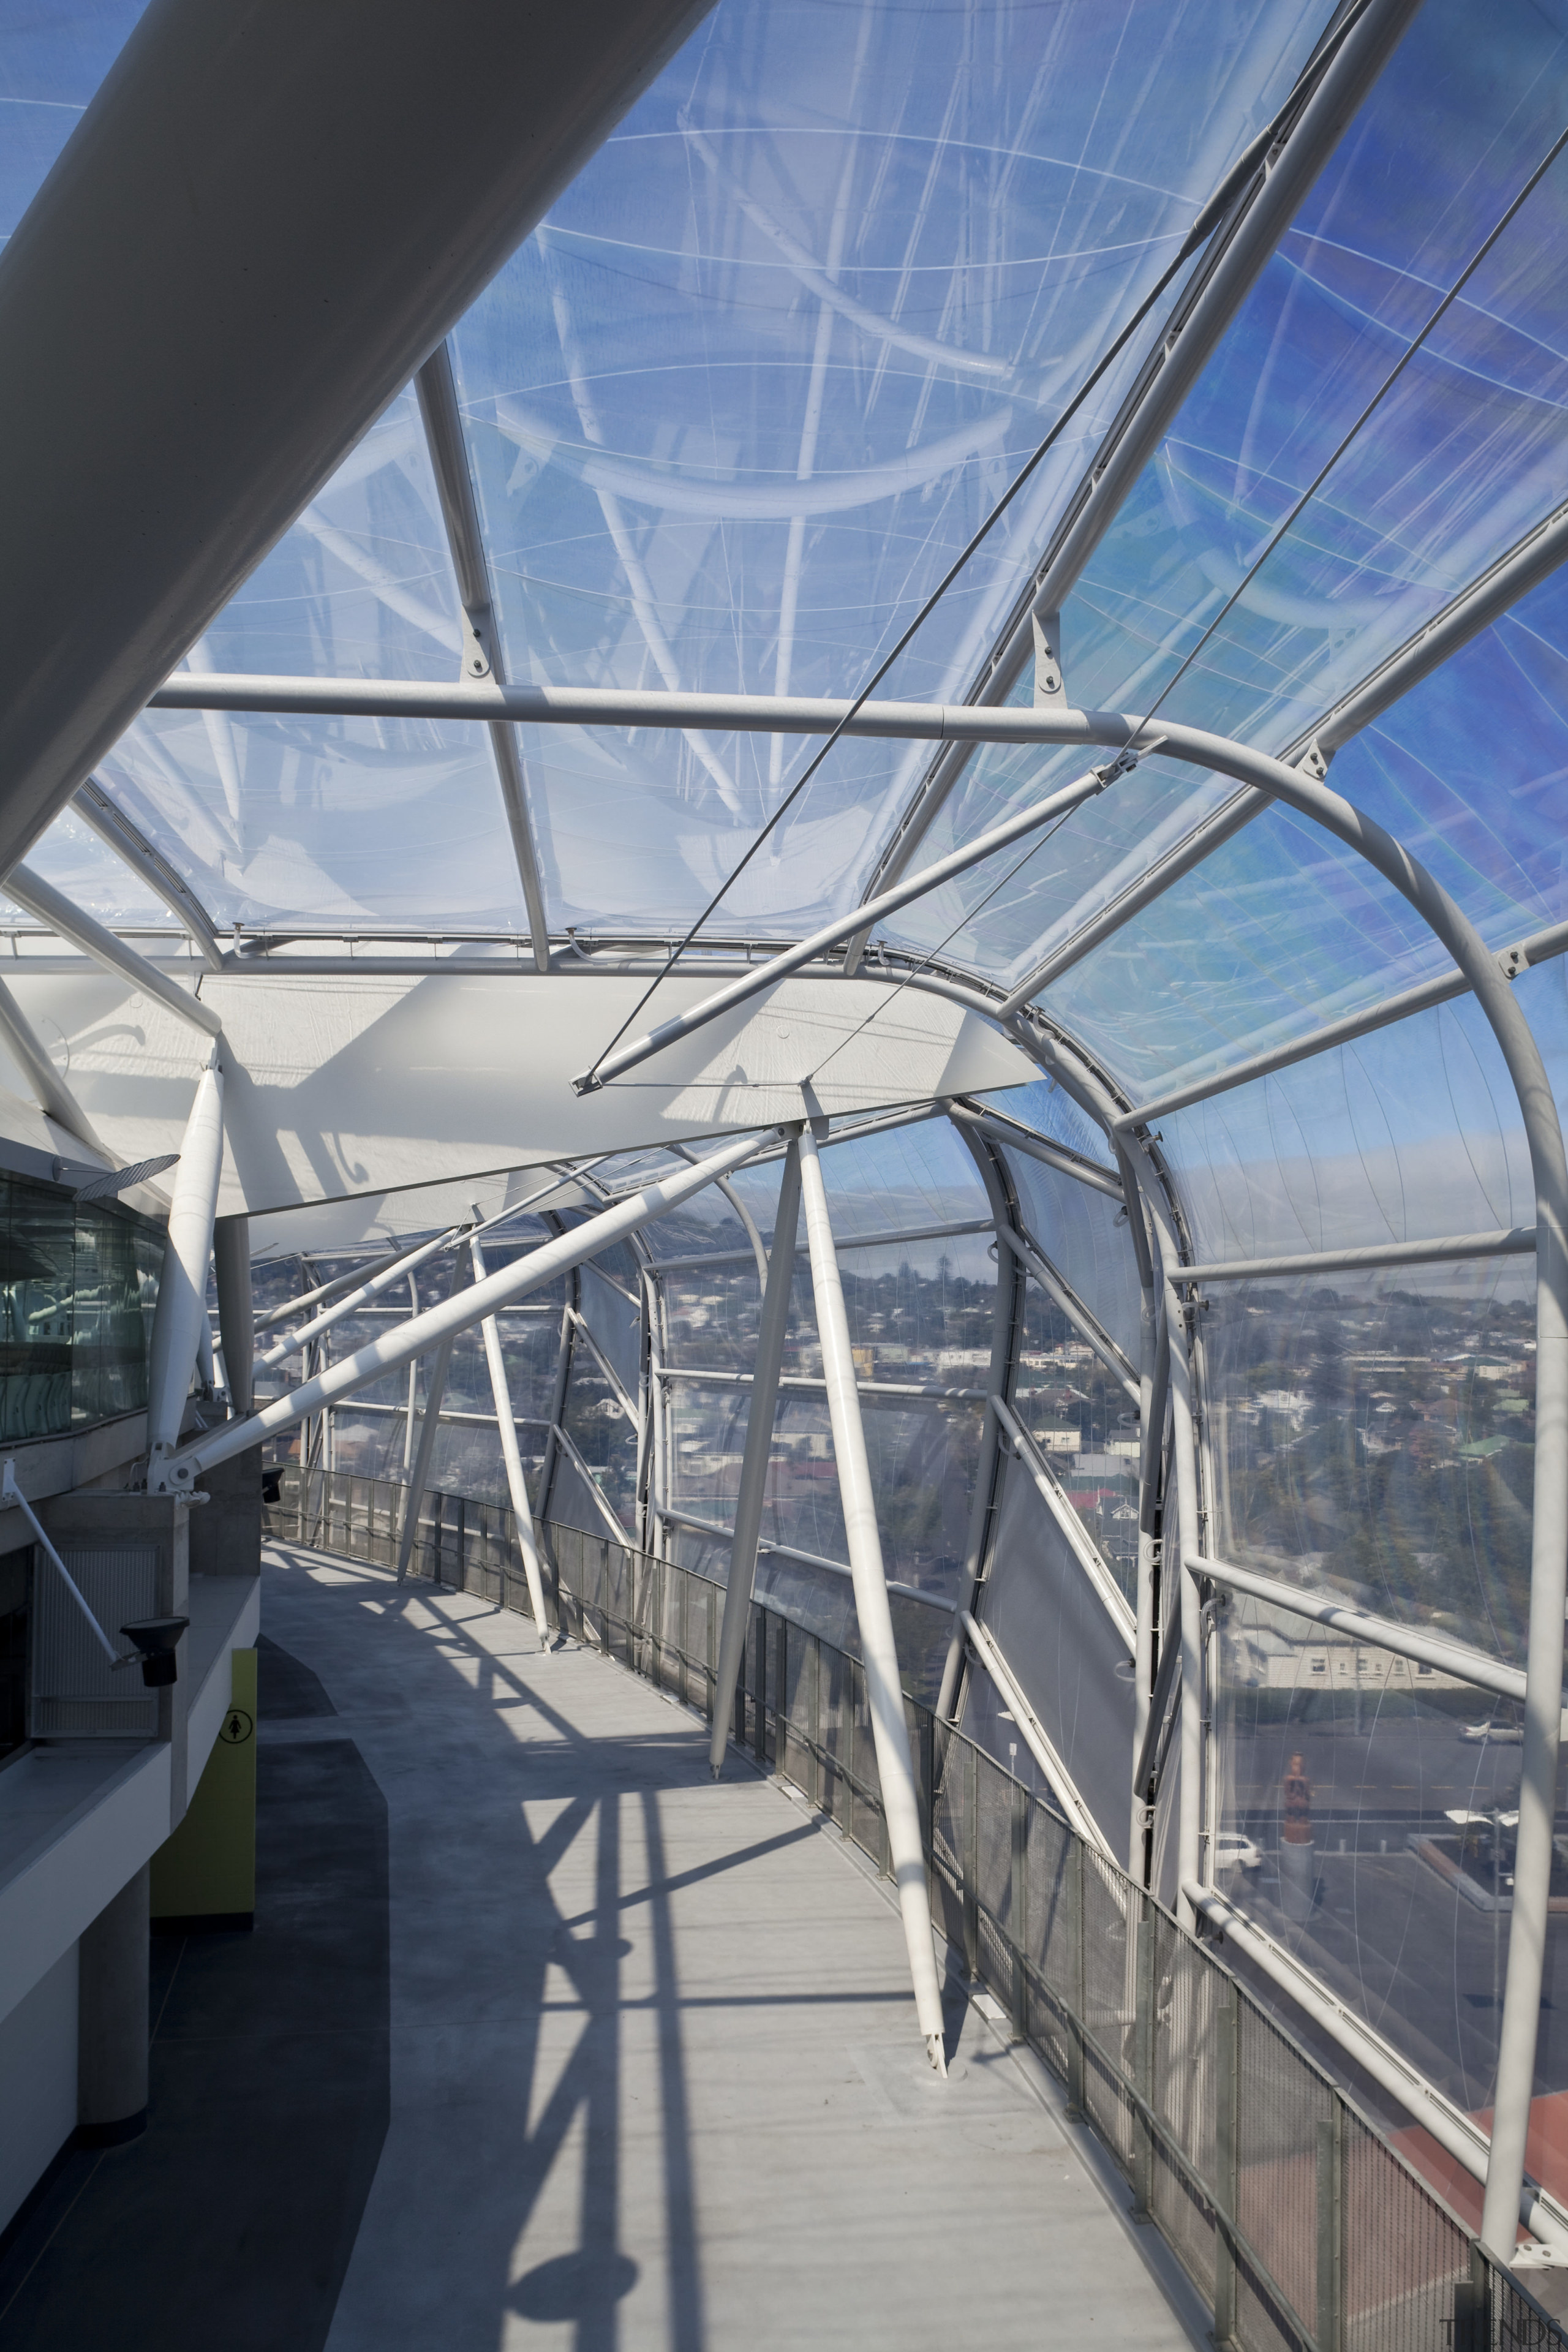 View of the ETFE canopy of Eden Park architecture, building, daylighting, fixed link, line, sky, structure, tourist attraction, gray